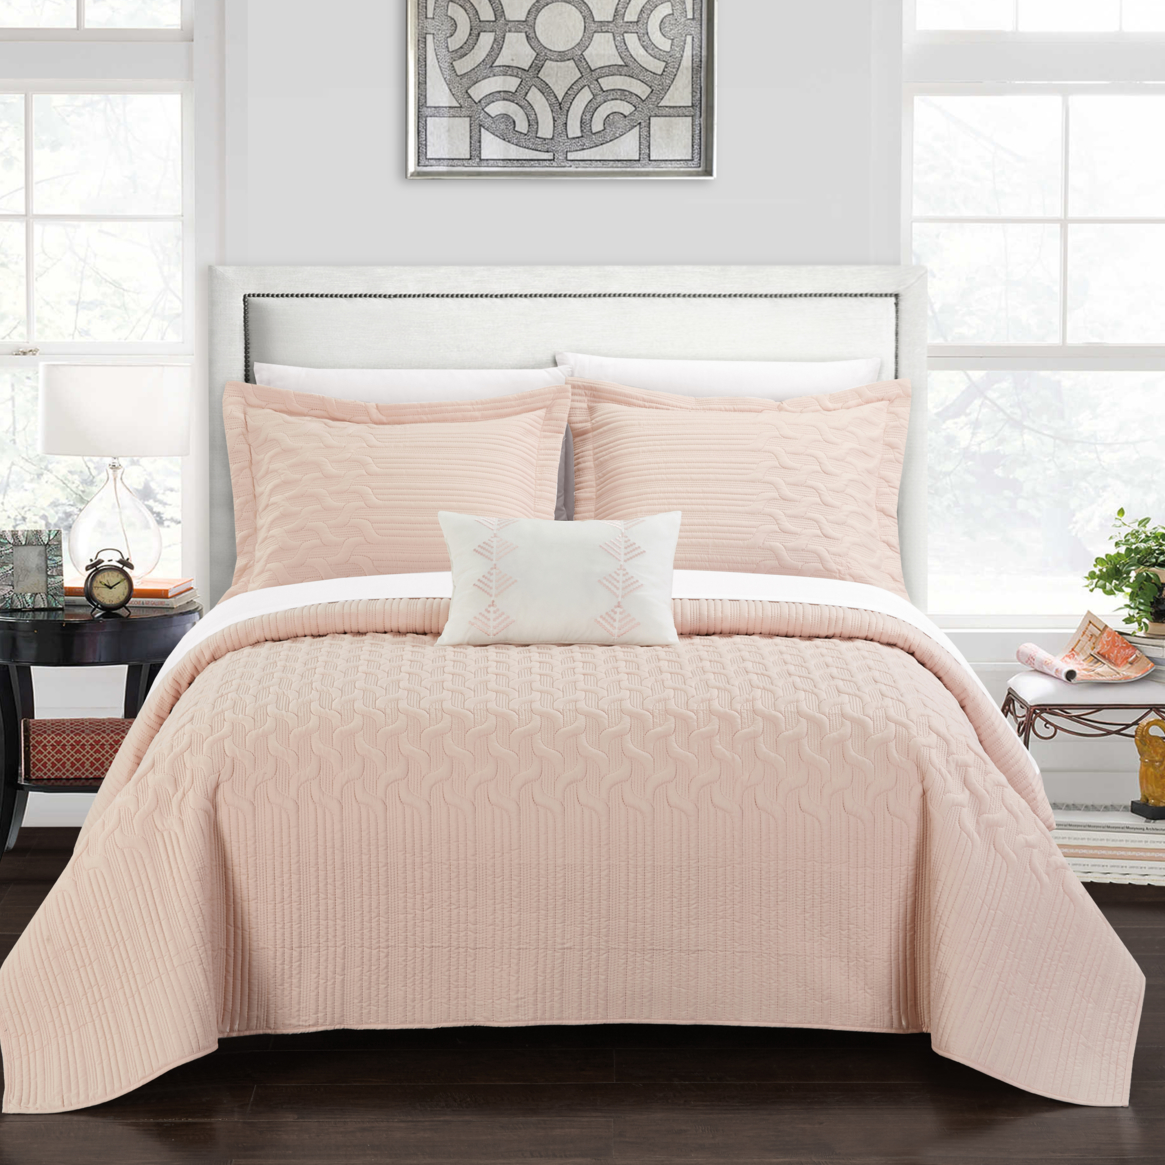 Shaliya 8 Or 6 Piece Quilt Cover Set Interlaced Vine Pattern Quilted Bed In A Bag - Blush, Queen